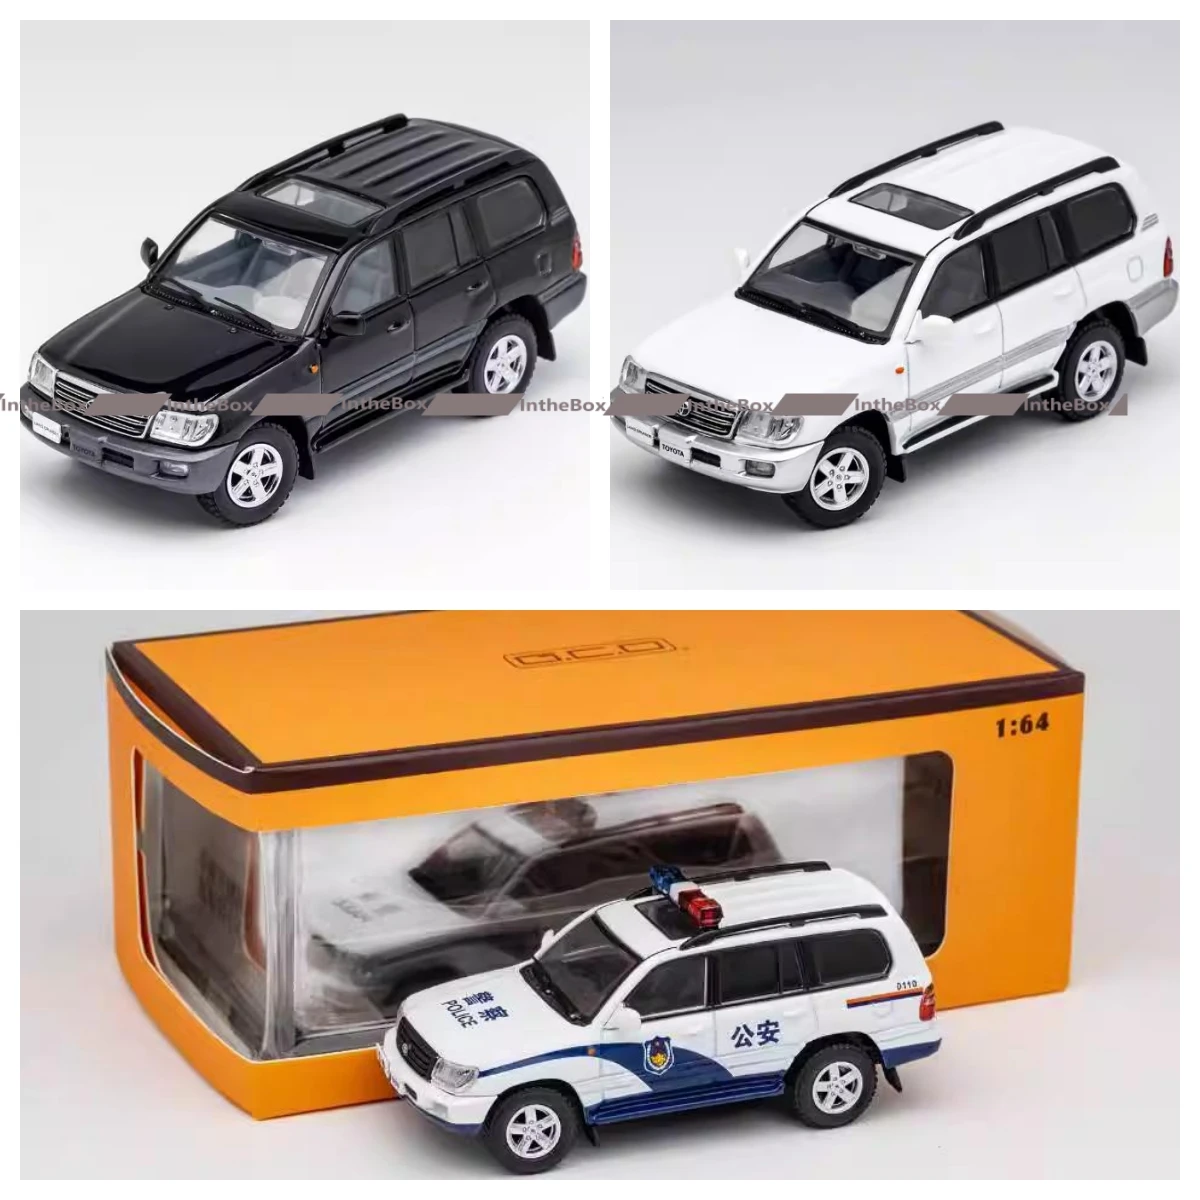 

GCD 1:64 LC100 LAND CRUISER Diecast Model car Collection Limited Edition Hobby Toys